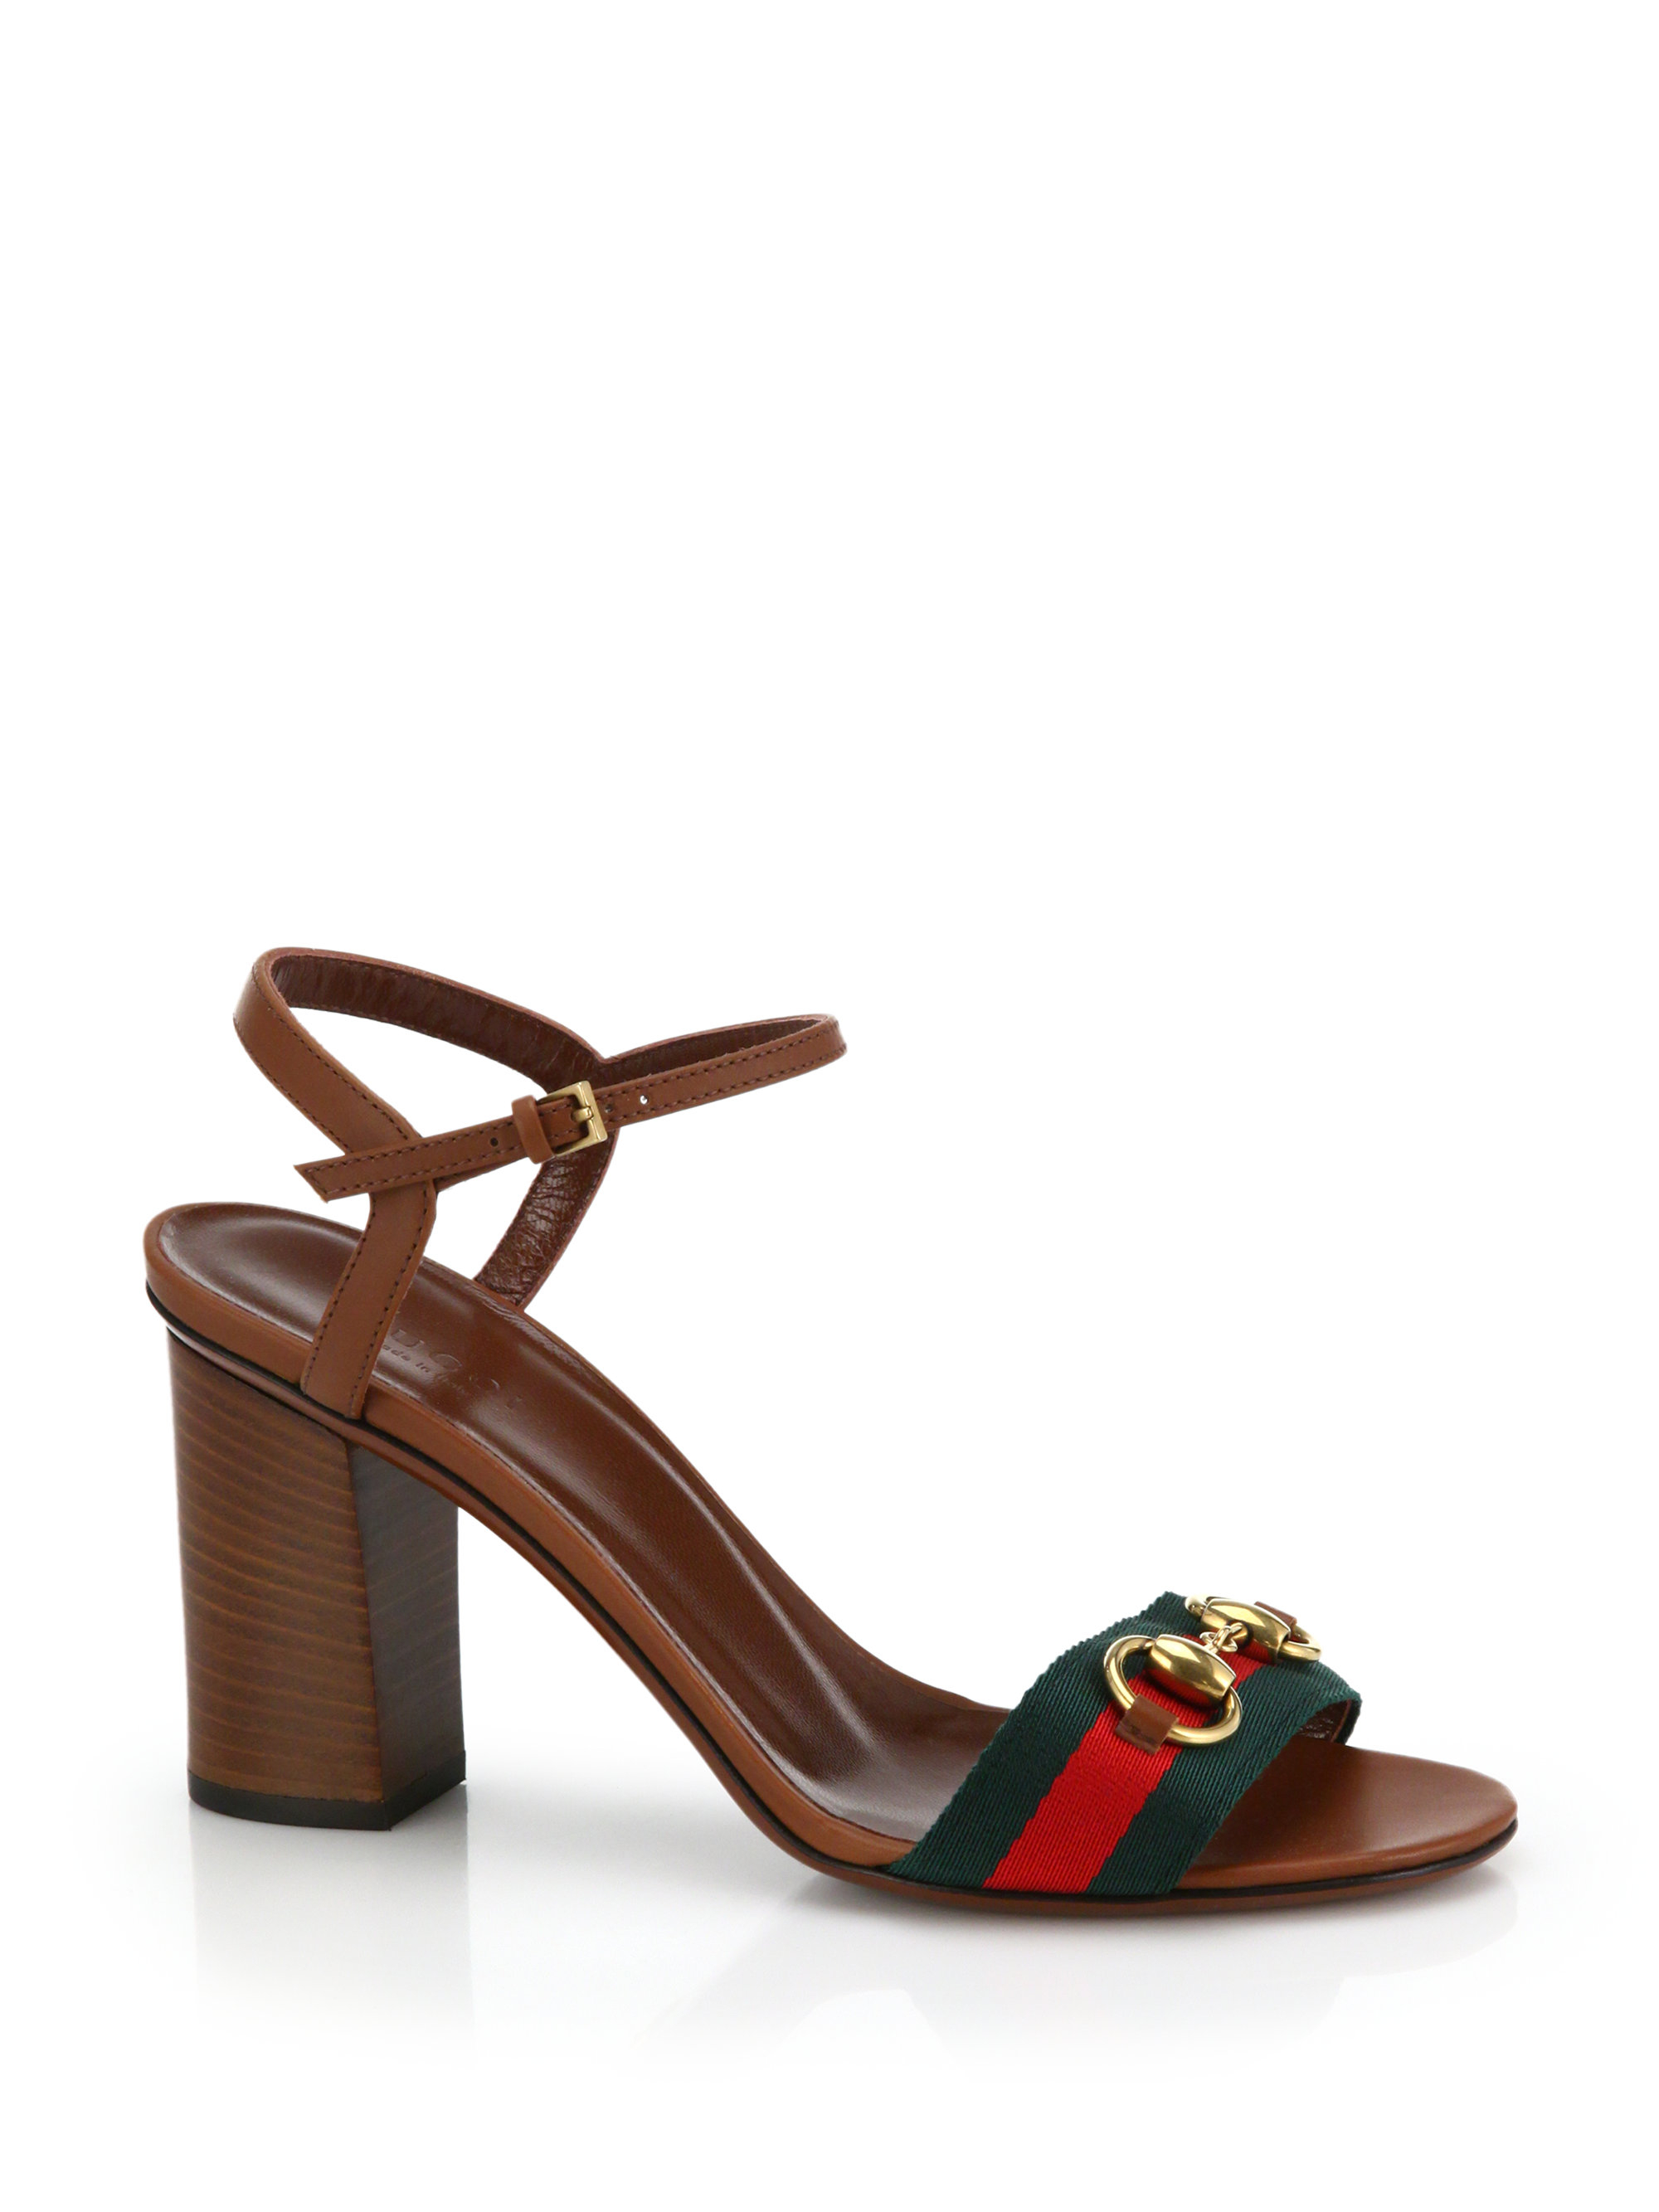 Gucci Horsebit Fabric & Leather Sandals in Brown | Lyst